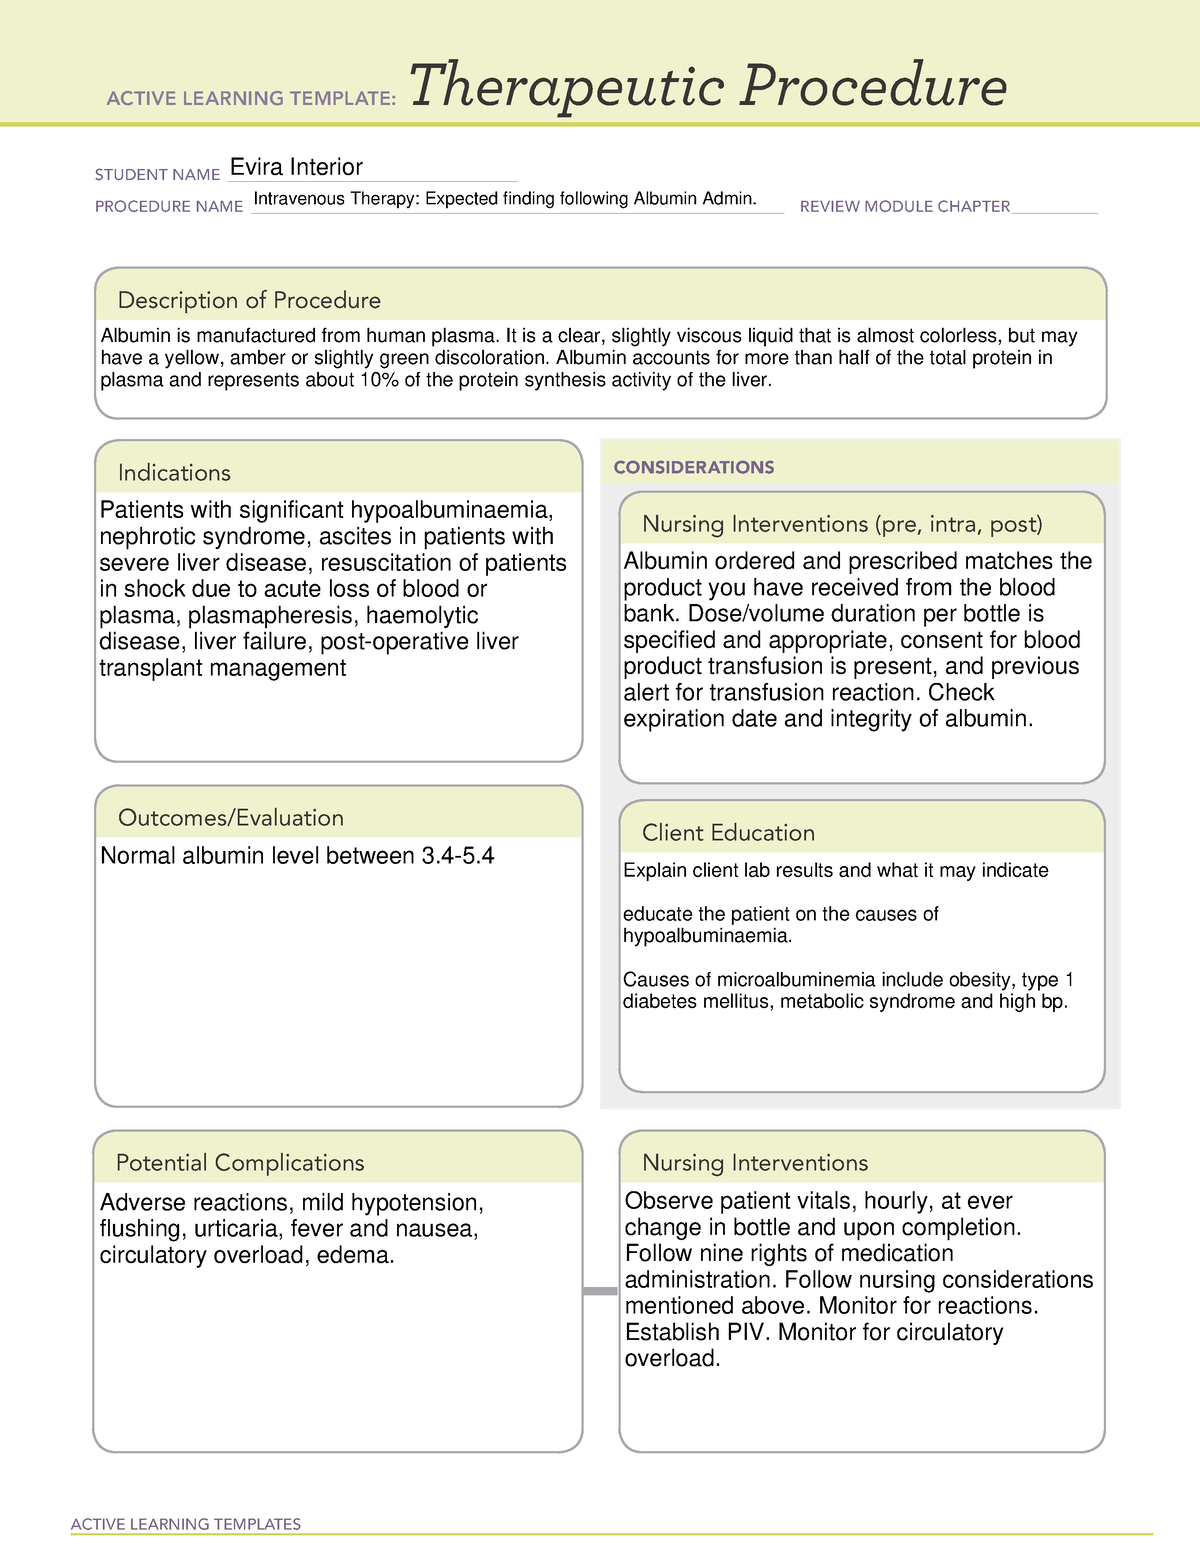 albumin-alt-therapeutic-procedure-active-learning-templates